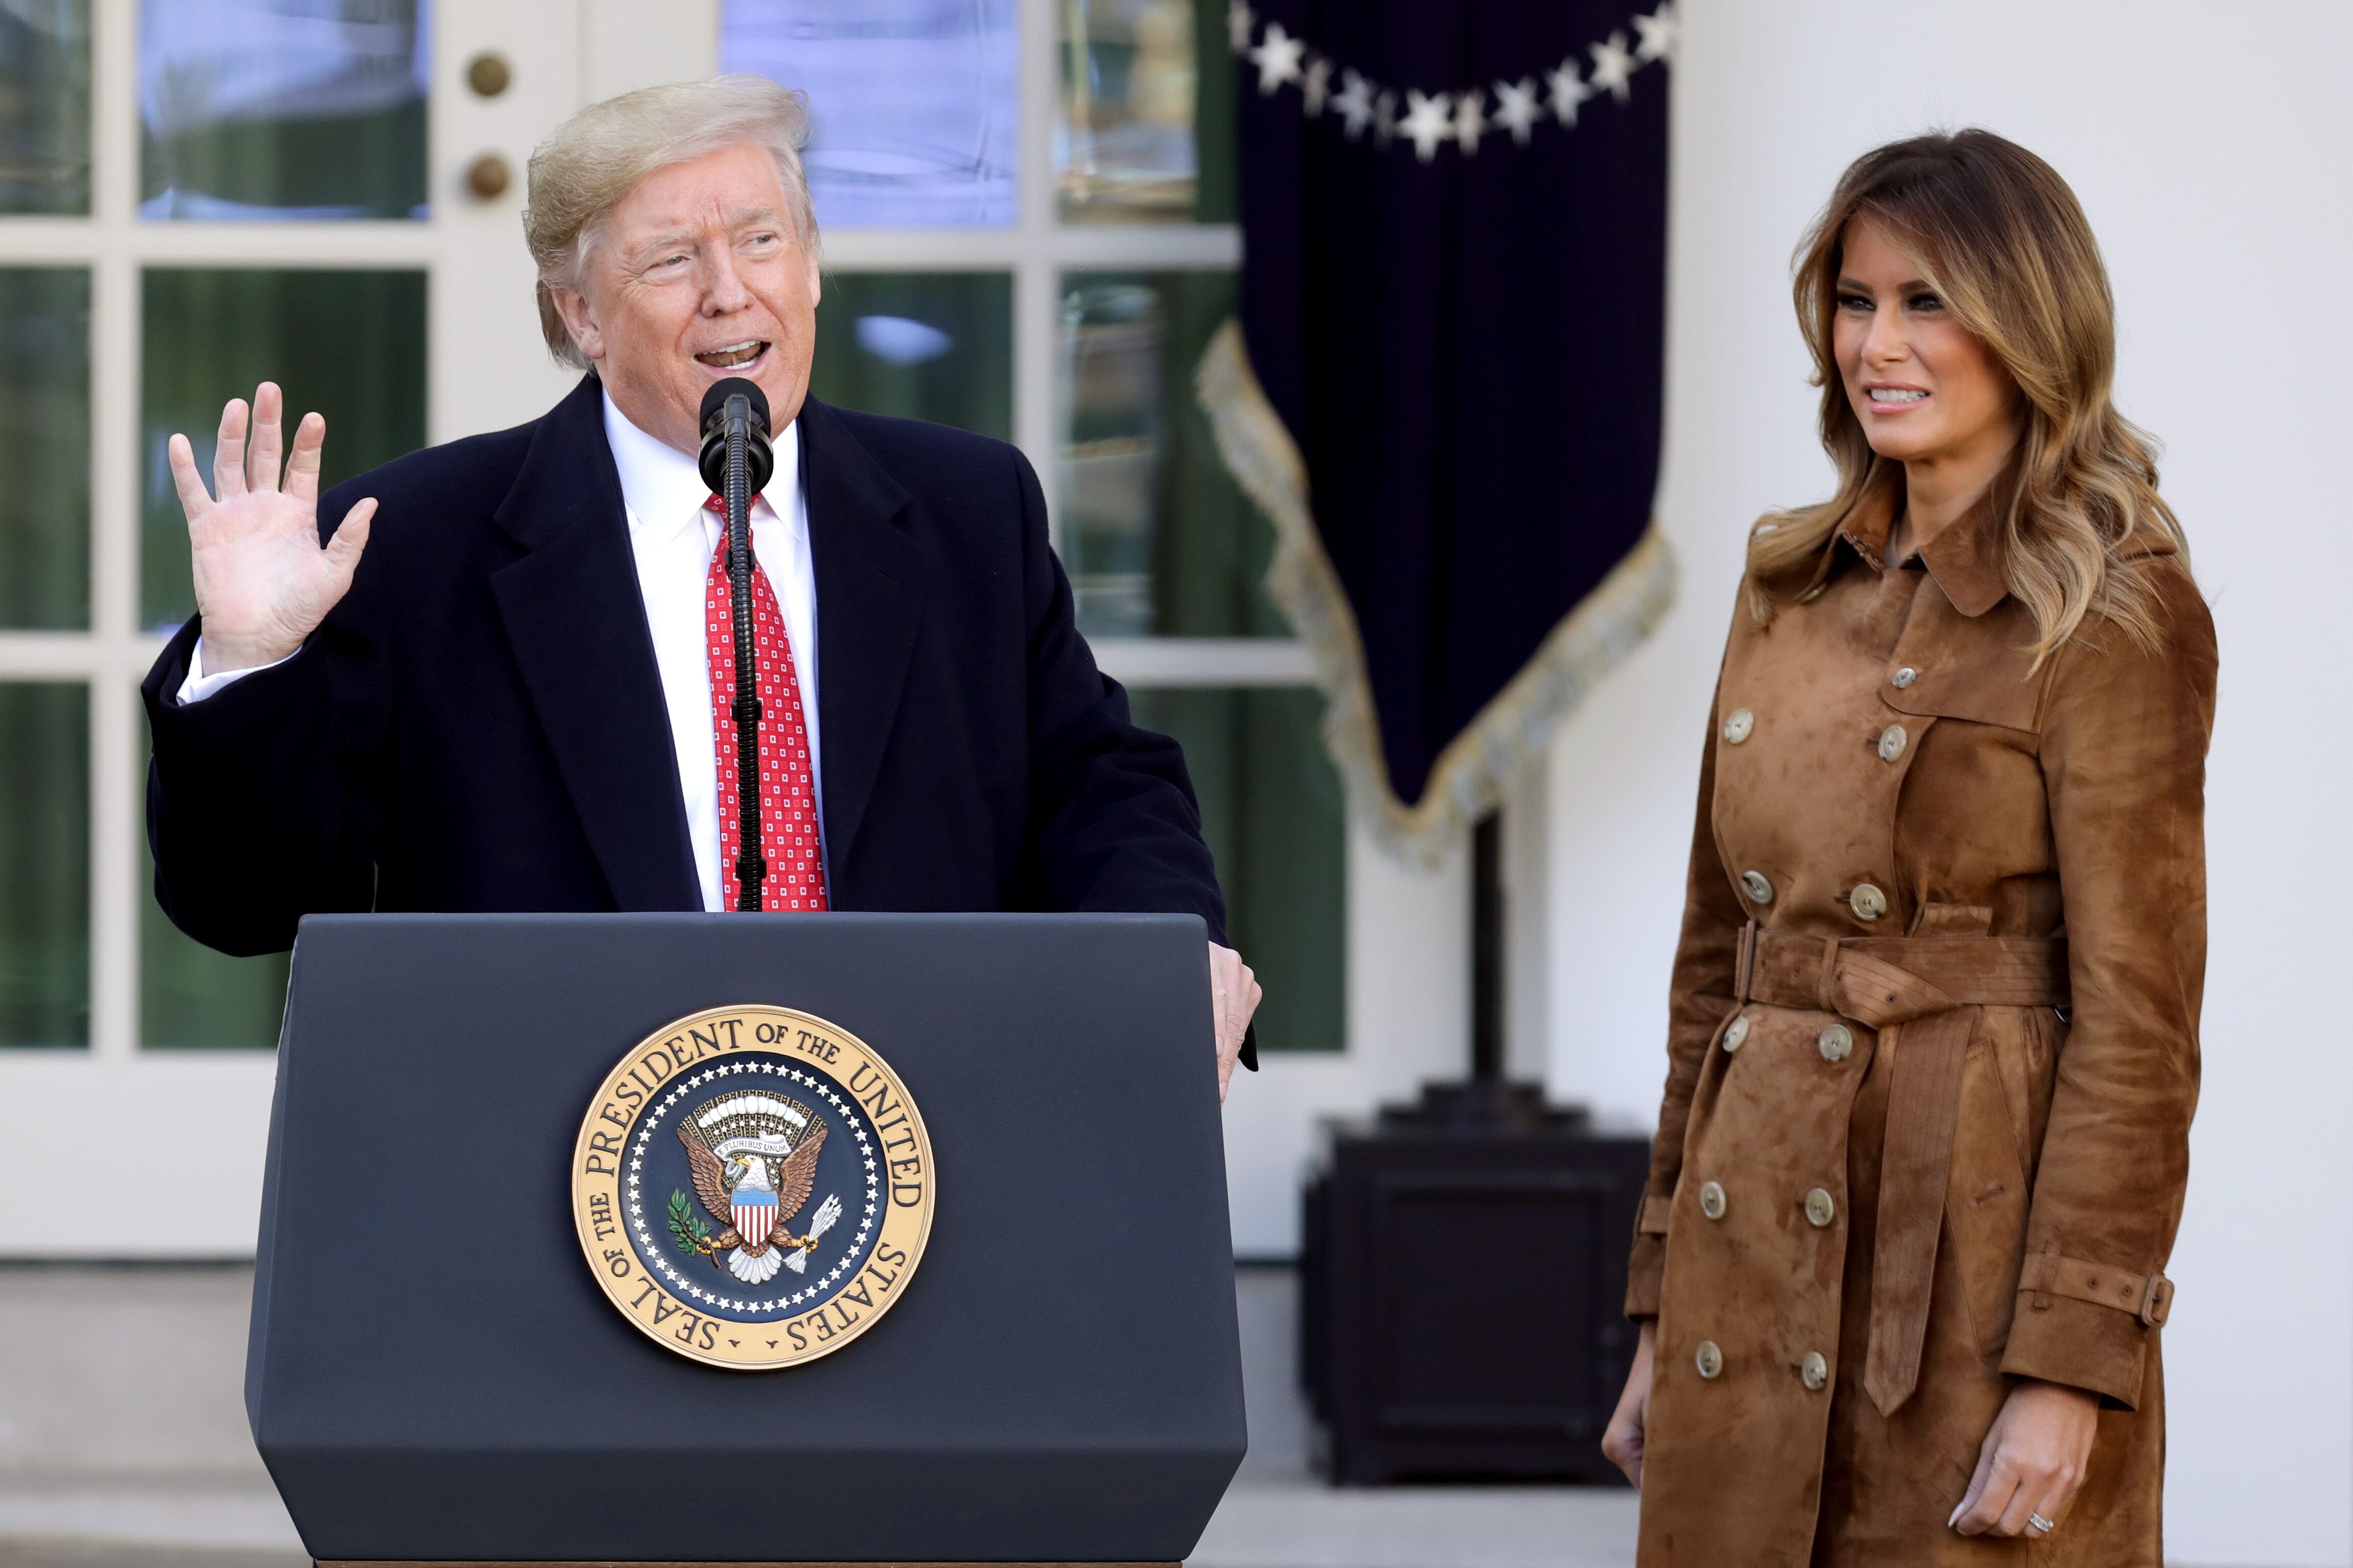  U.S. President Donald Trump delivers remarks before giving a presidential ‘pardon’ to the National Thanksgiving Turkey 'Butter' during the traditional event with first lady Melania Trump (R) in the Rose Garden of the White House November 26, 2019 in Washington, DC | Photo: Getty Images